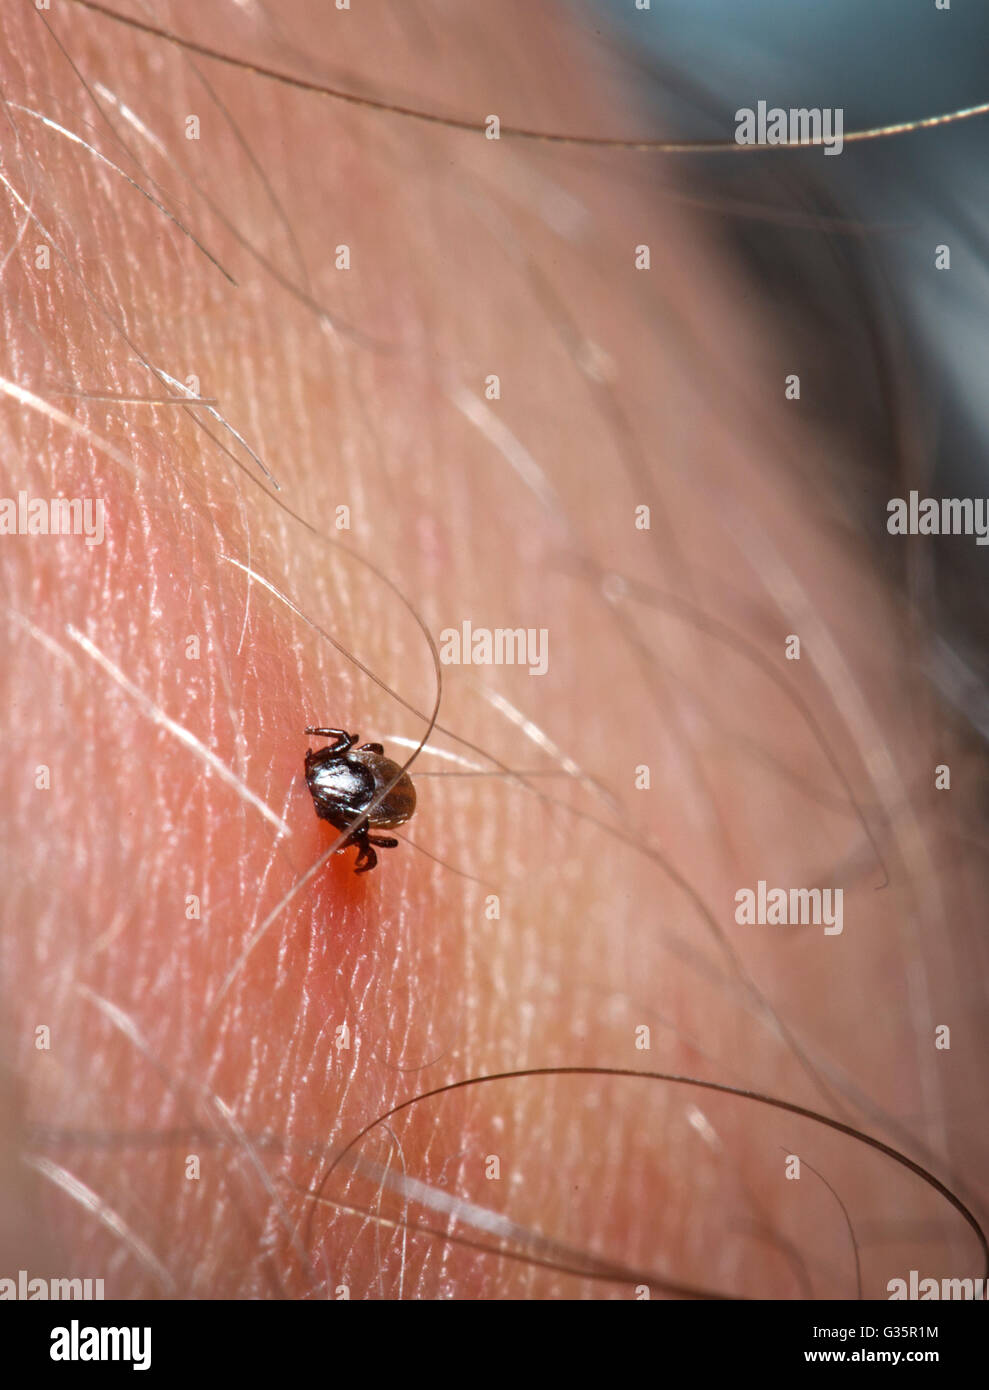 A tick embedded into a human Stock Photo